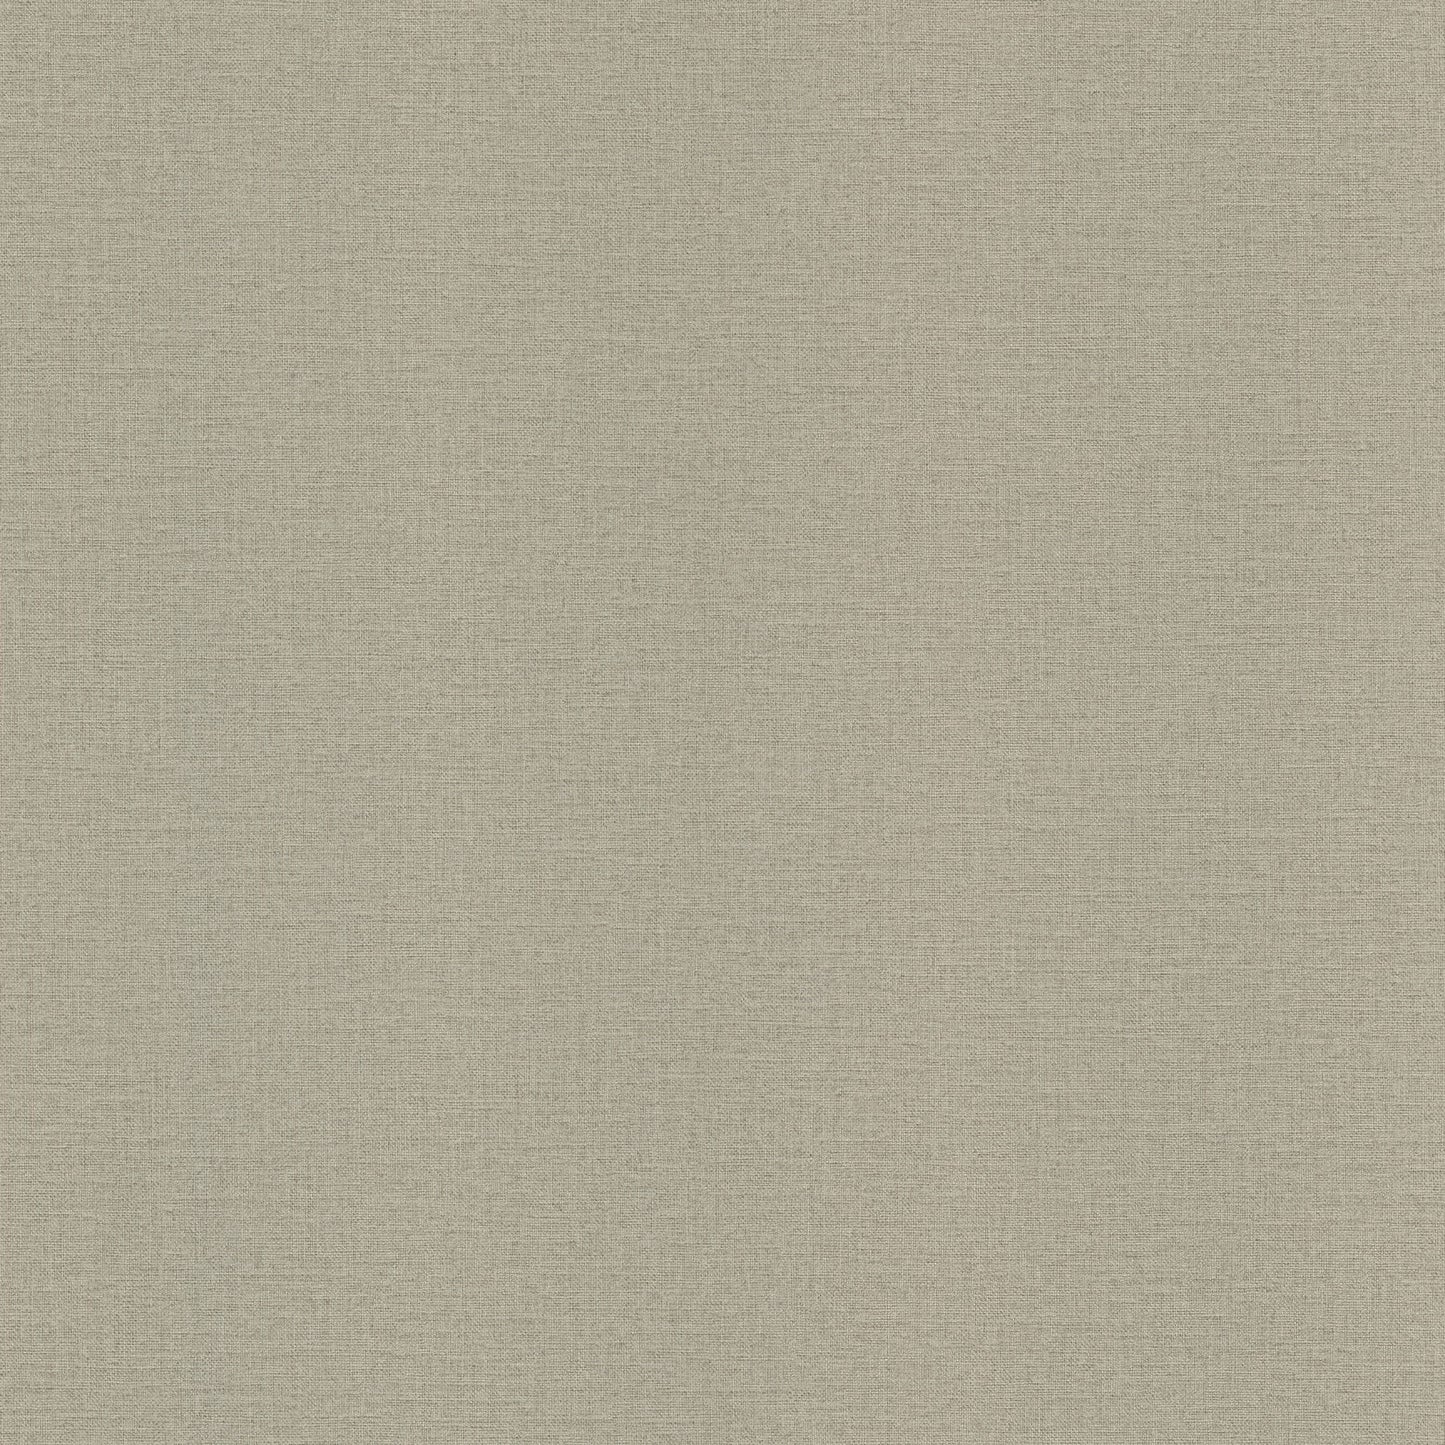 Select 2774-449815 Stones & Woods Neutrals Textured Wallpaper by Advantage